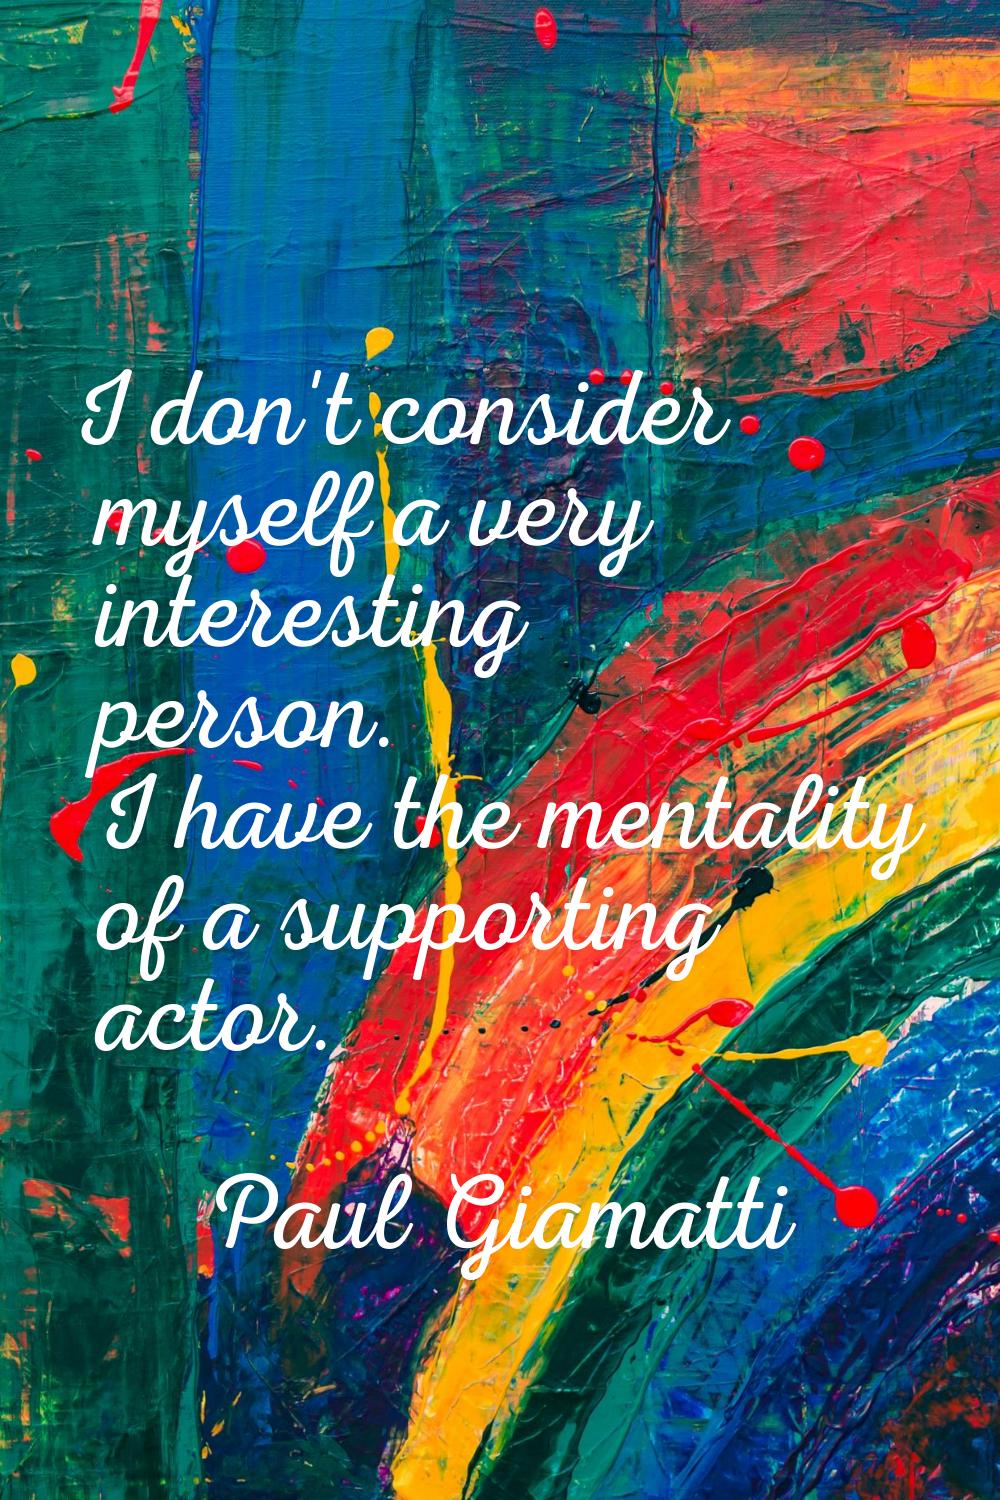 I don't consider myself a very interesting person. I have the mentality of a supporting actor.